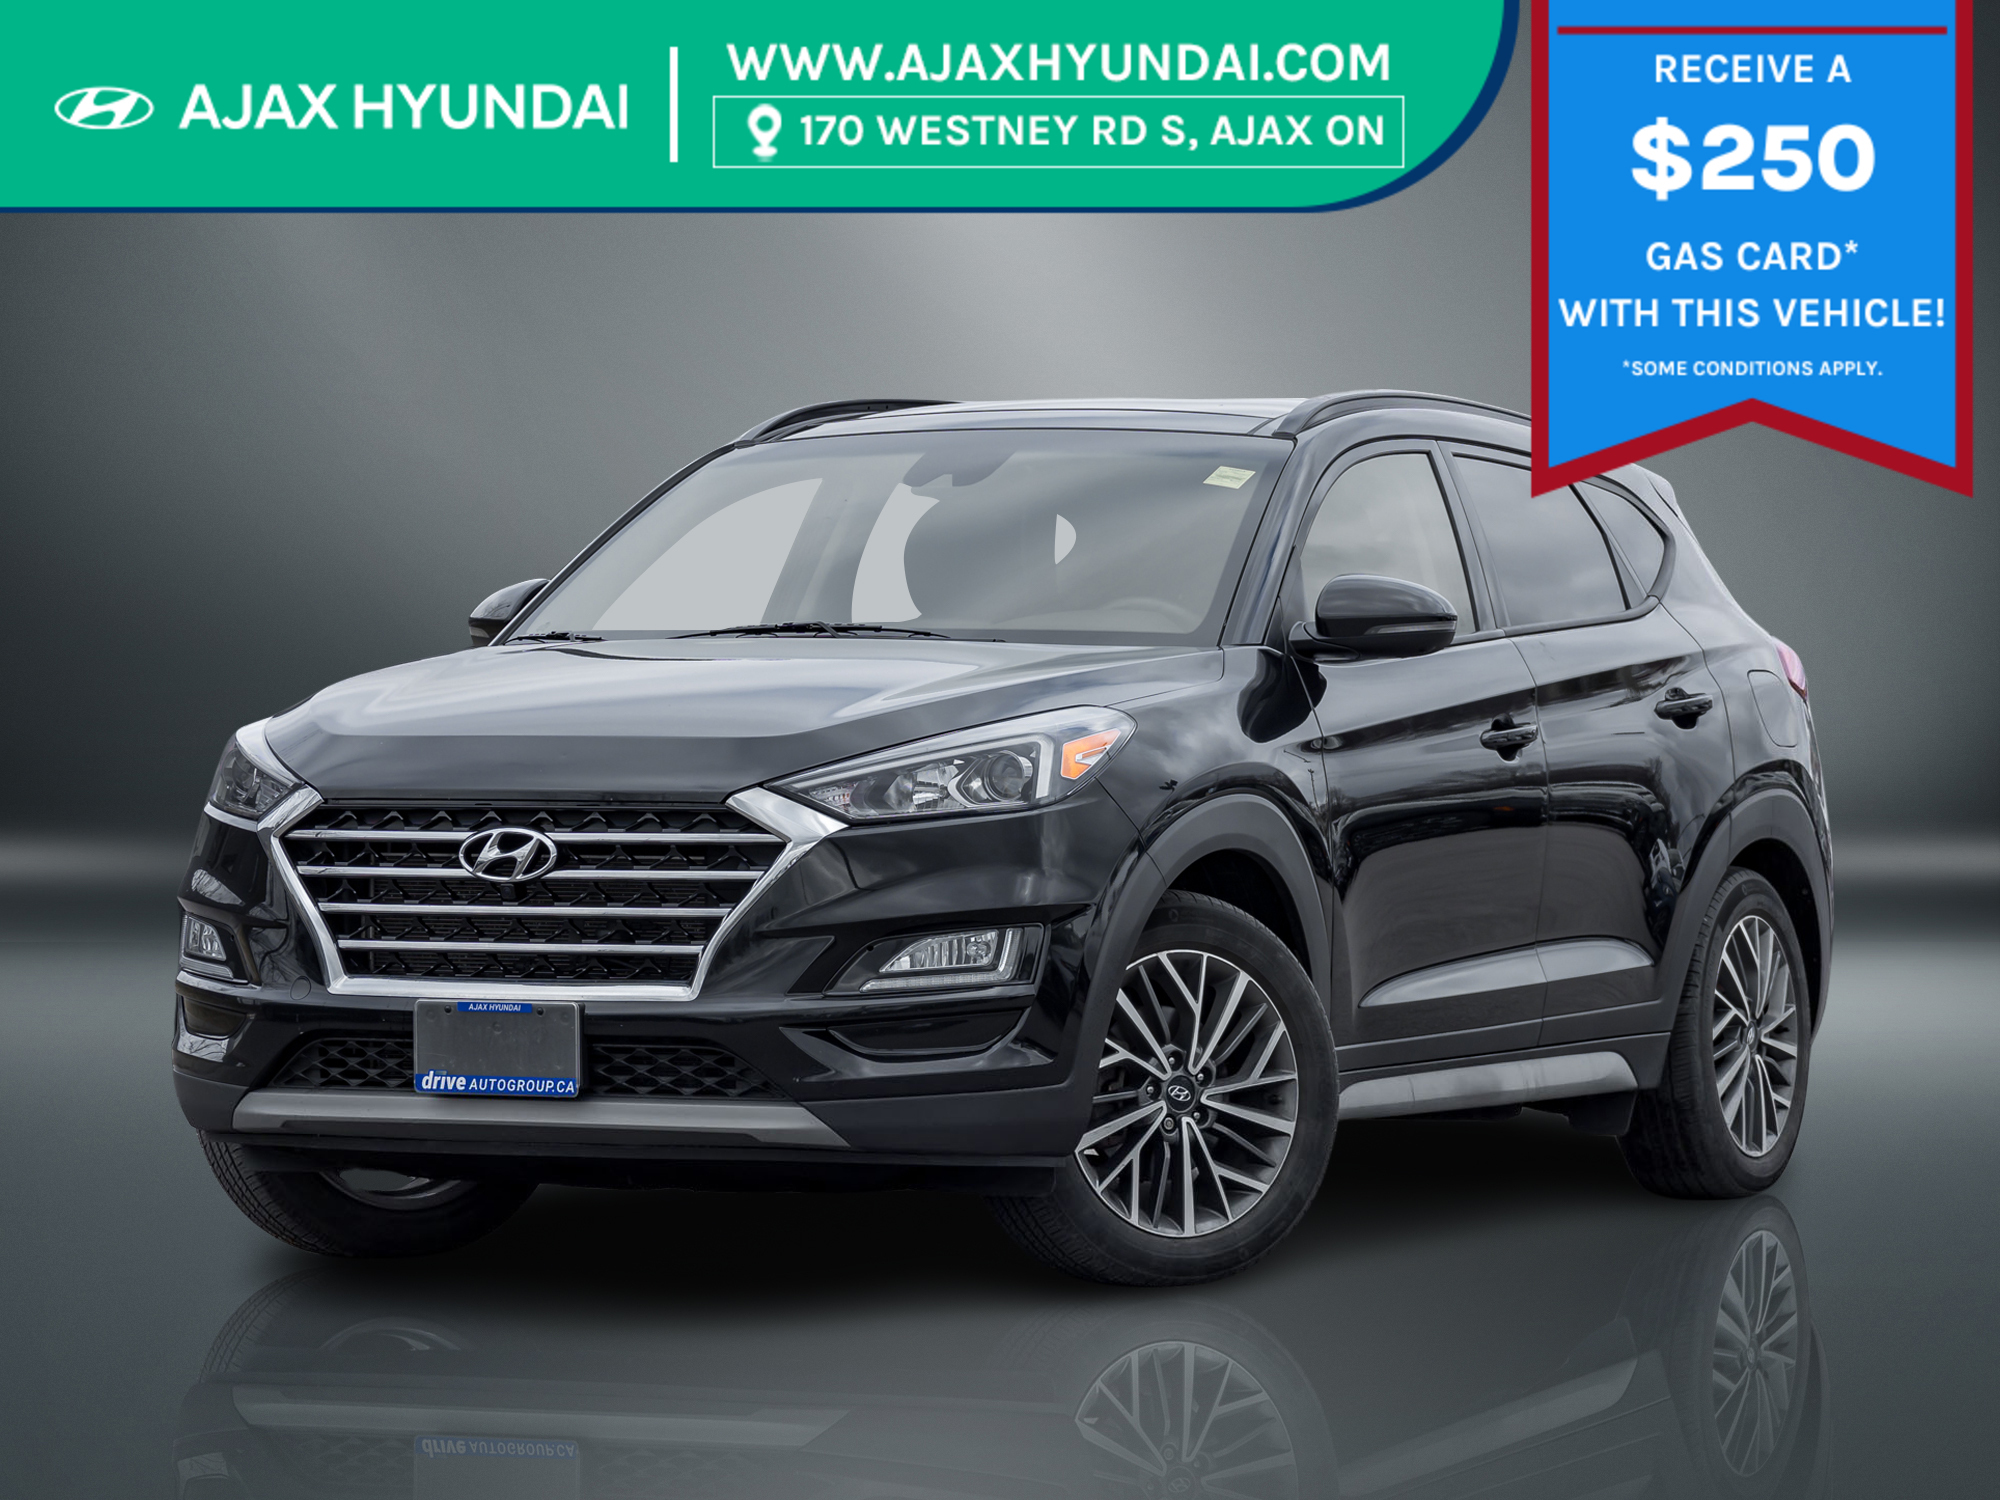 2019 Hyundai Tucson Luxury ONE OWNER NO ACCIDENT RATES FROM 4.99% ONE 